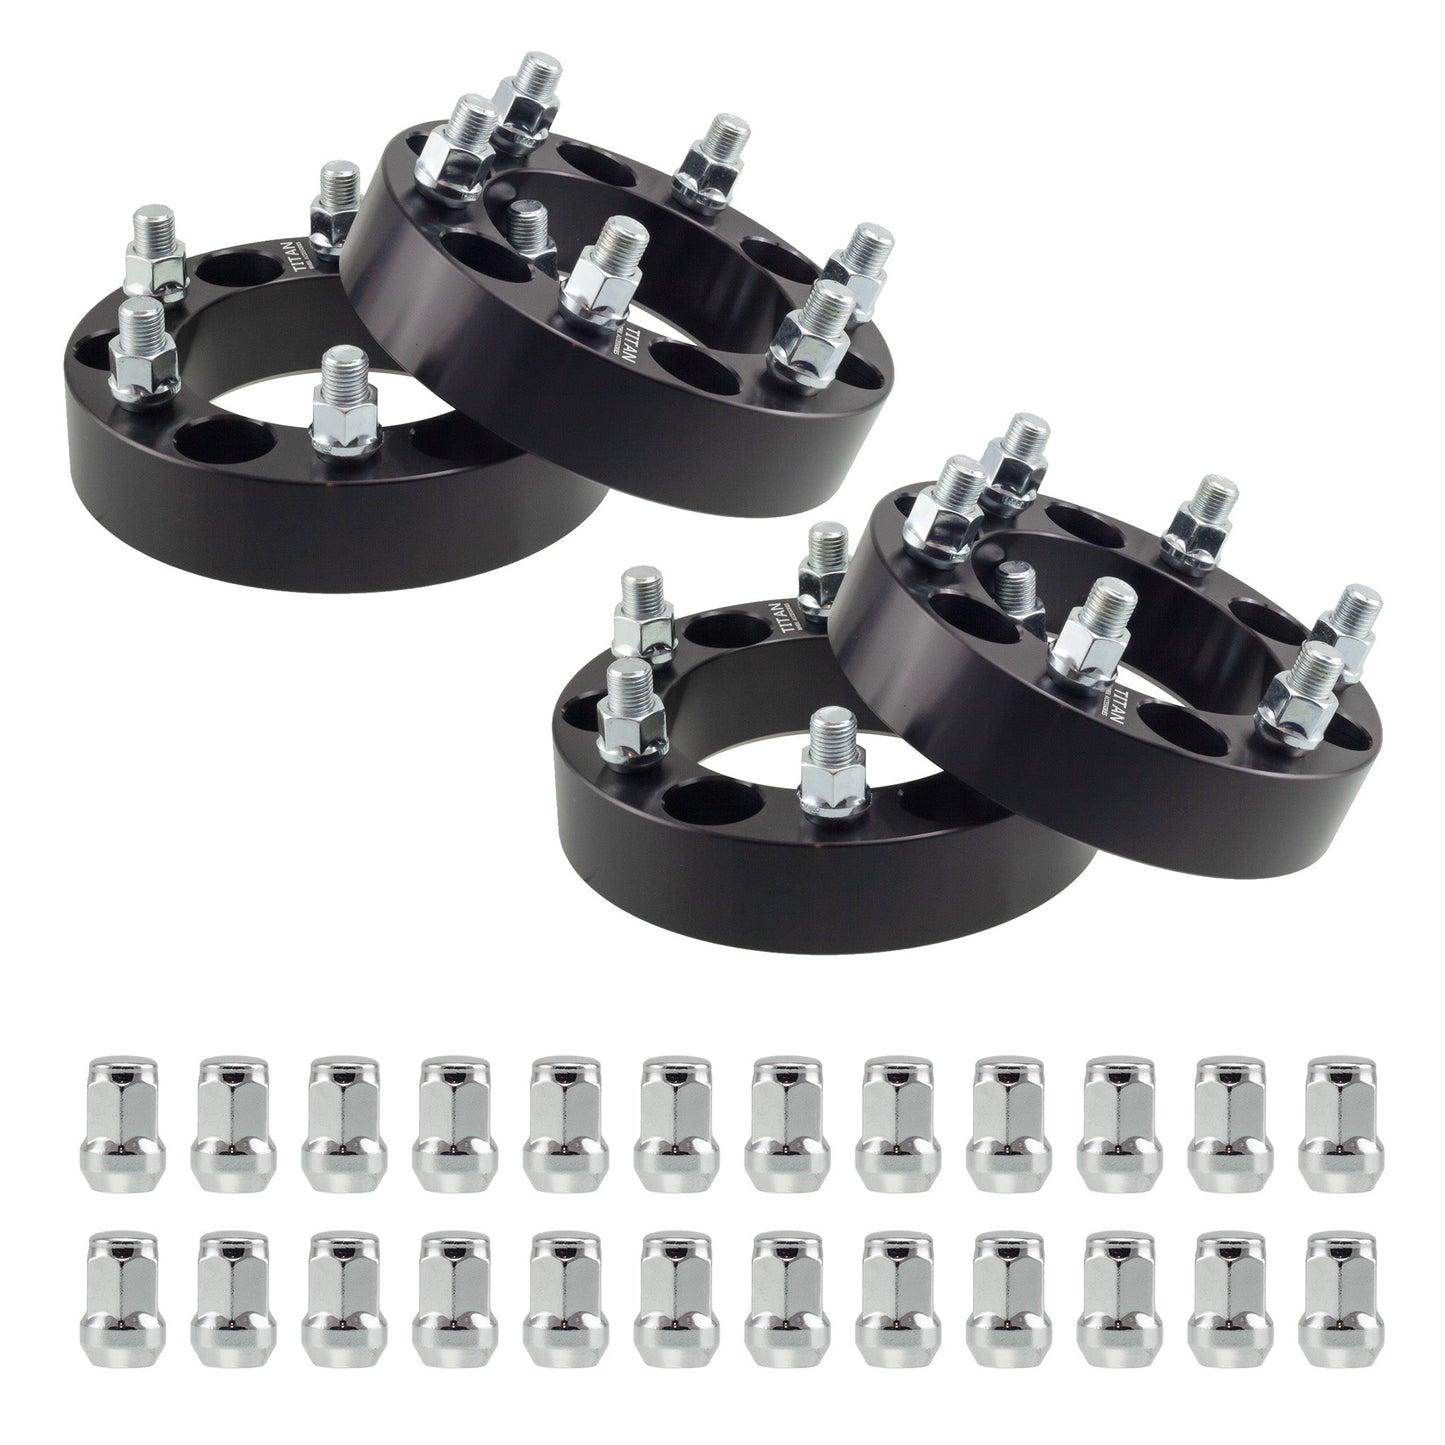 2" (50mm) Titan Wheel Spacers for Ford F-150 Expedition | 6x135 | 14x2 Studs | Titan Wheel Accessories